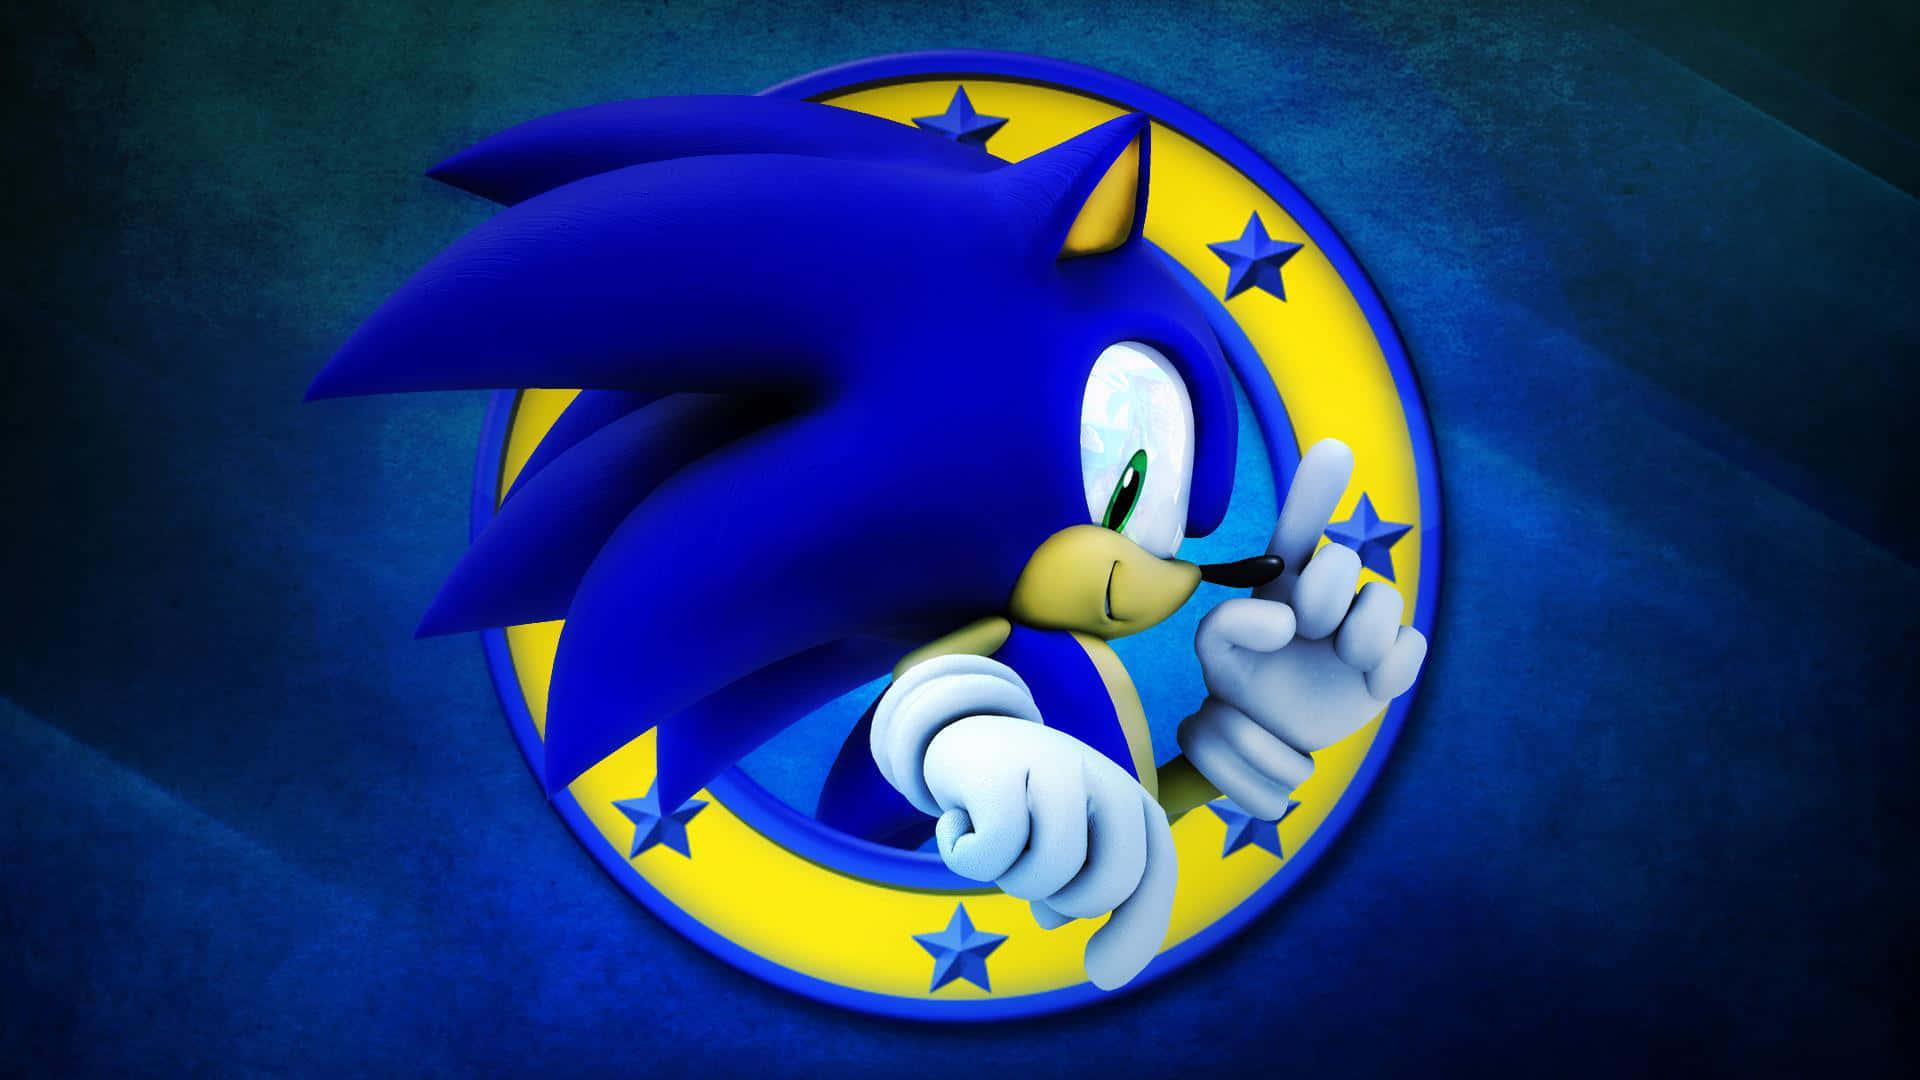 Sonic The Hedgehog Logo On A Blue Background Wallpaper